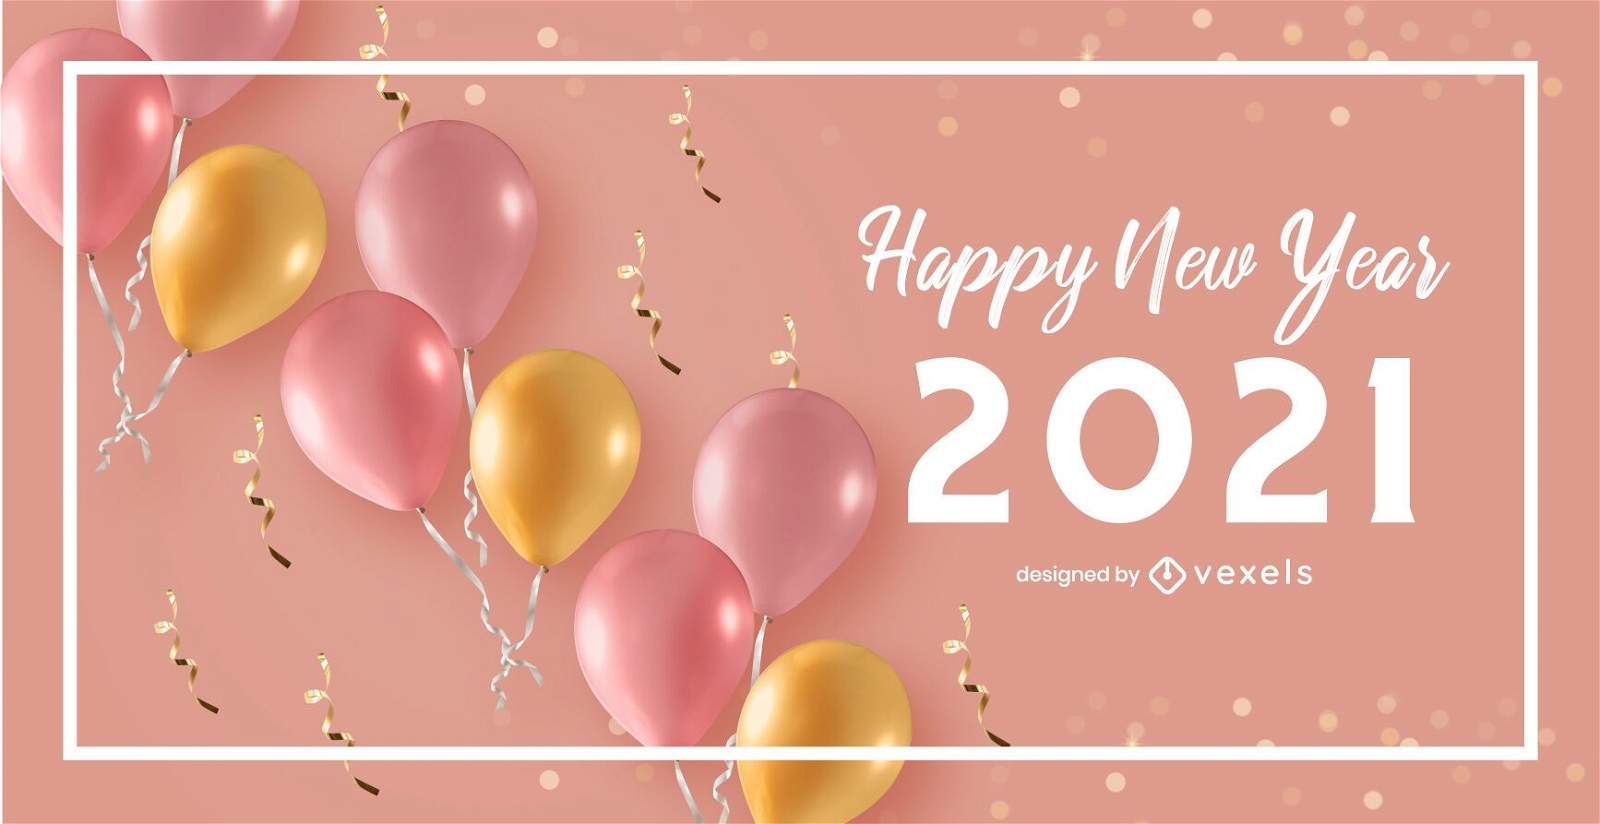 Happy New Year 2021 Celebration Background Design Vector Download